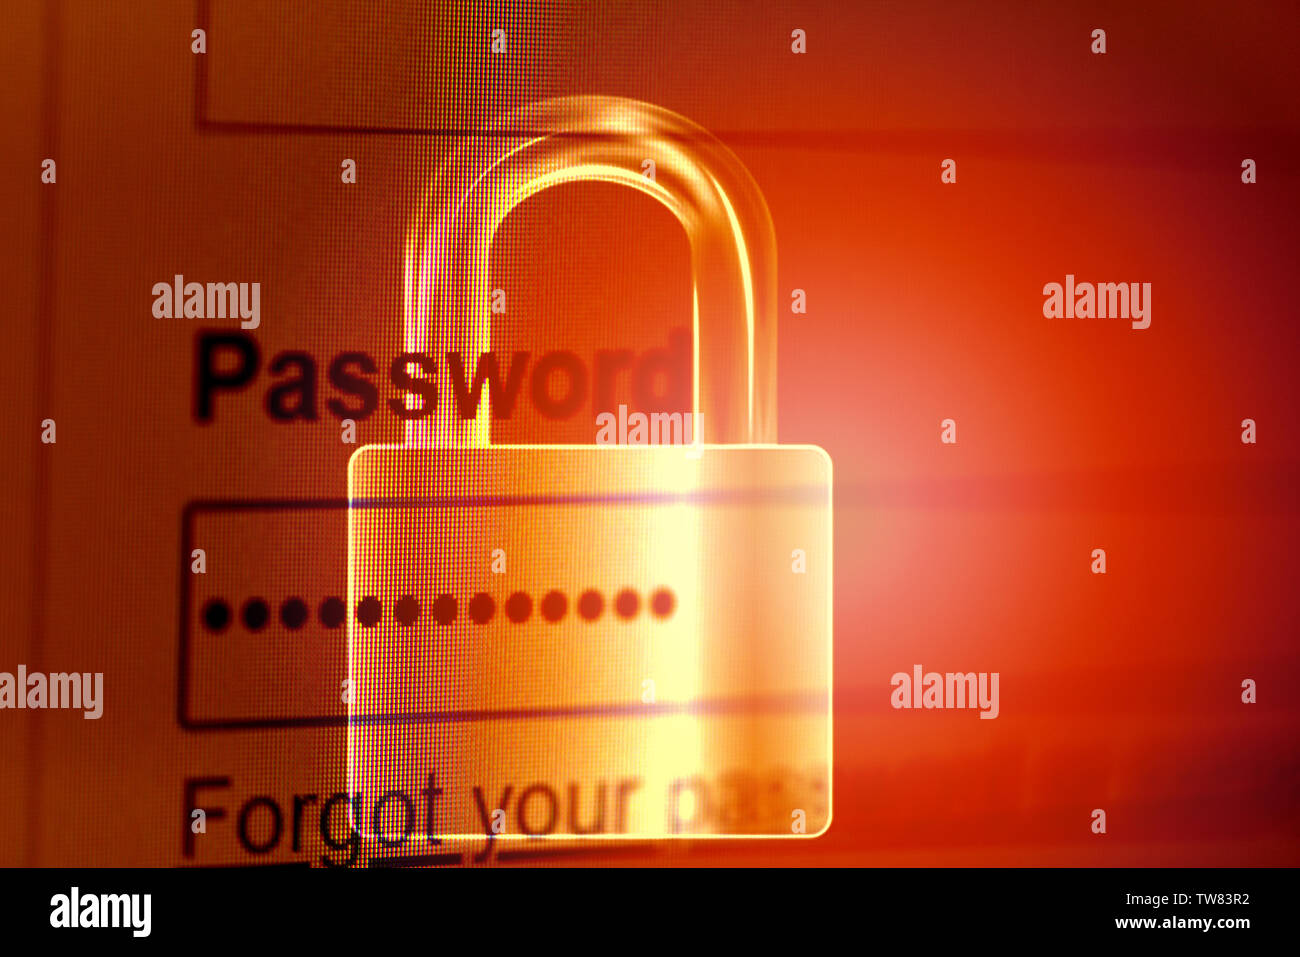 Password lock / password security cyber thief protection verification data system box on internet browser on computer screen and padlock background Stock Photo